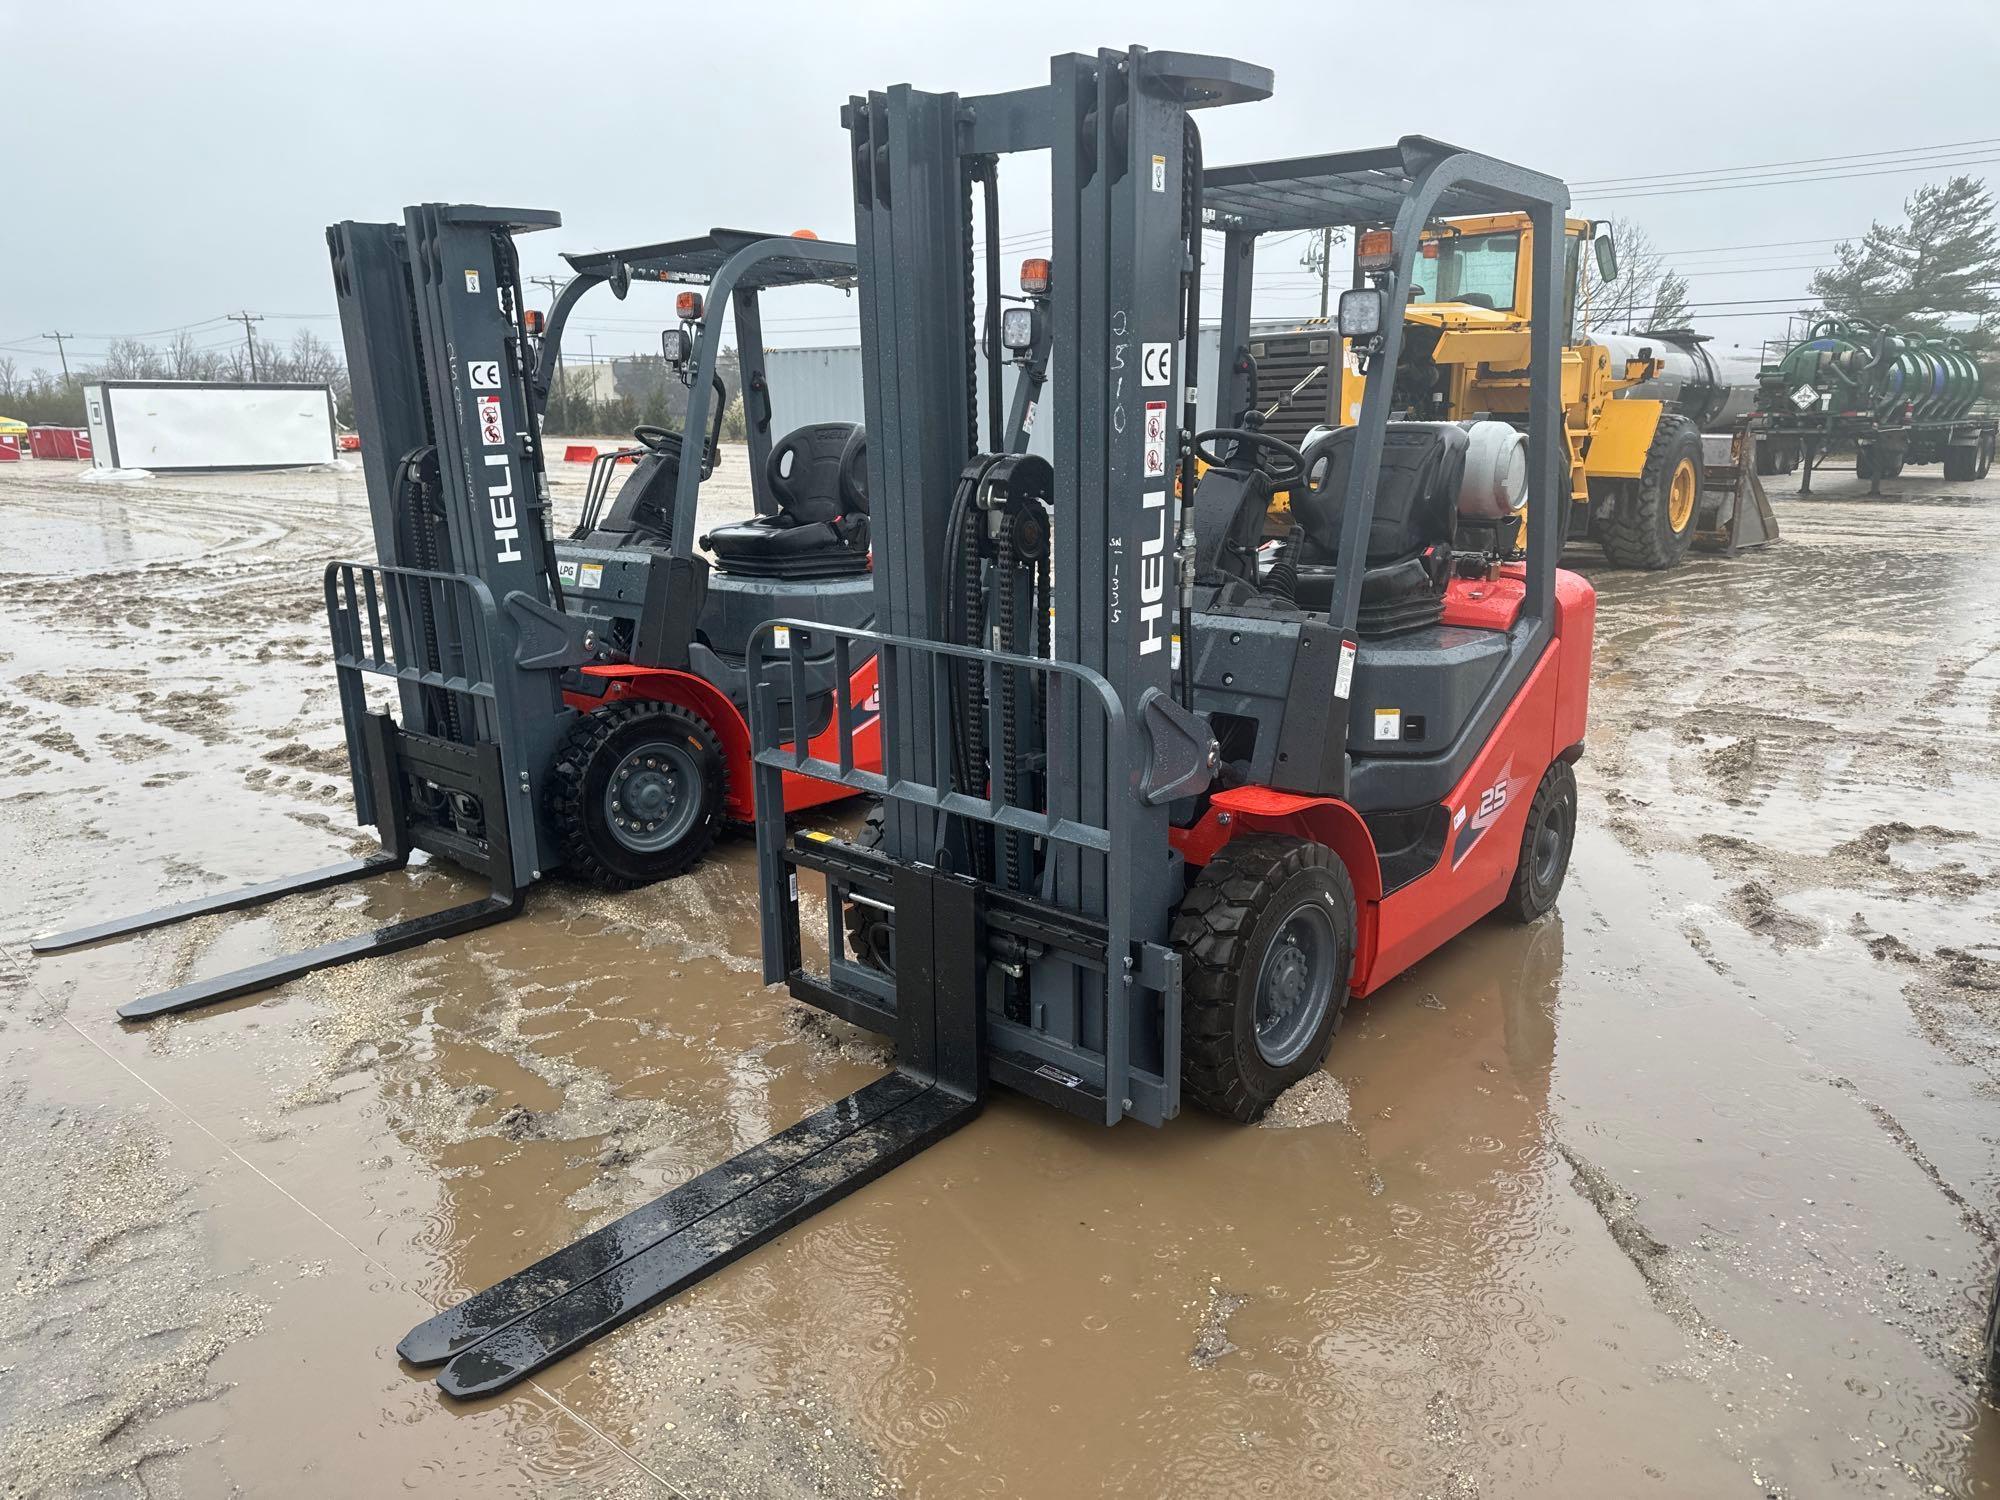 NEW HELI CPYD25 FORKLIFT SN:A1335 powered by LP engine, equipped with OROPS, 5,000lb lift capacity,